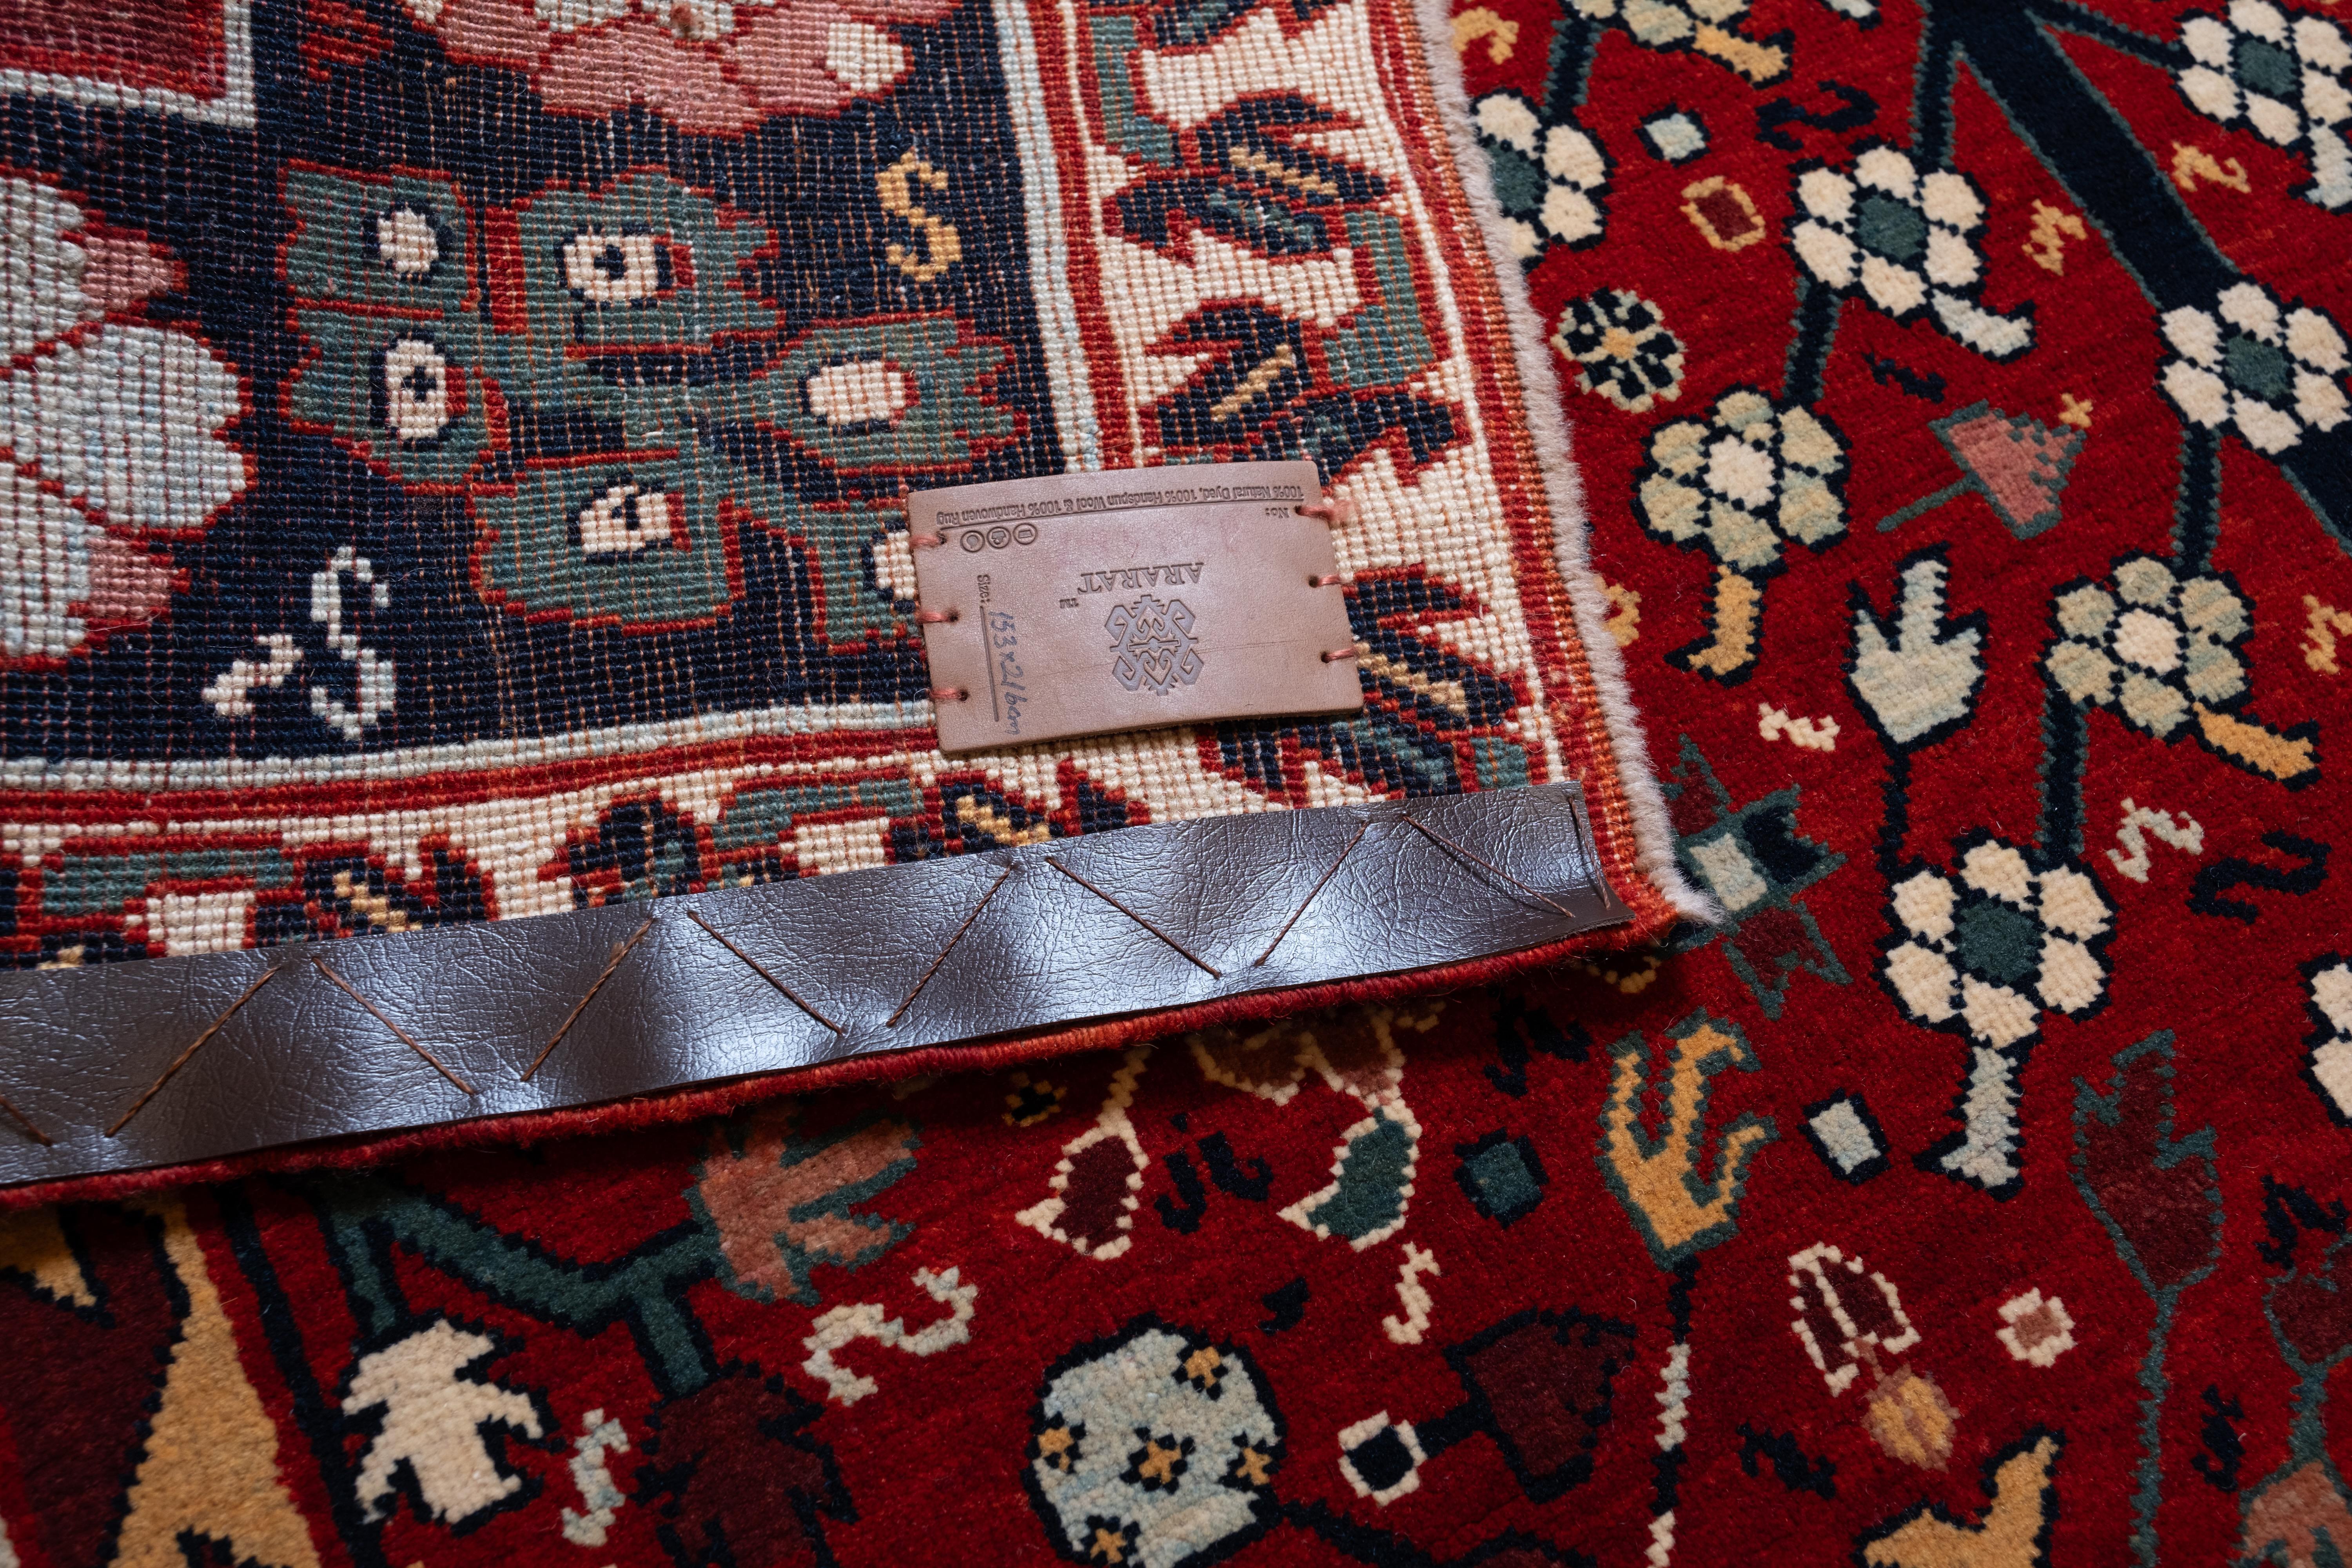 Contemporary Ararat Rugs Bid Majnum on Red Field Rug, 17th C Revival Carpet, Natural Dyed For Sale